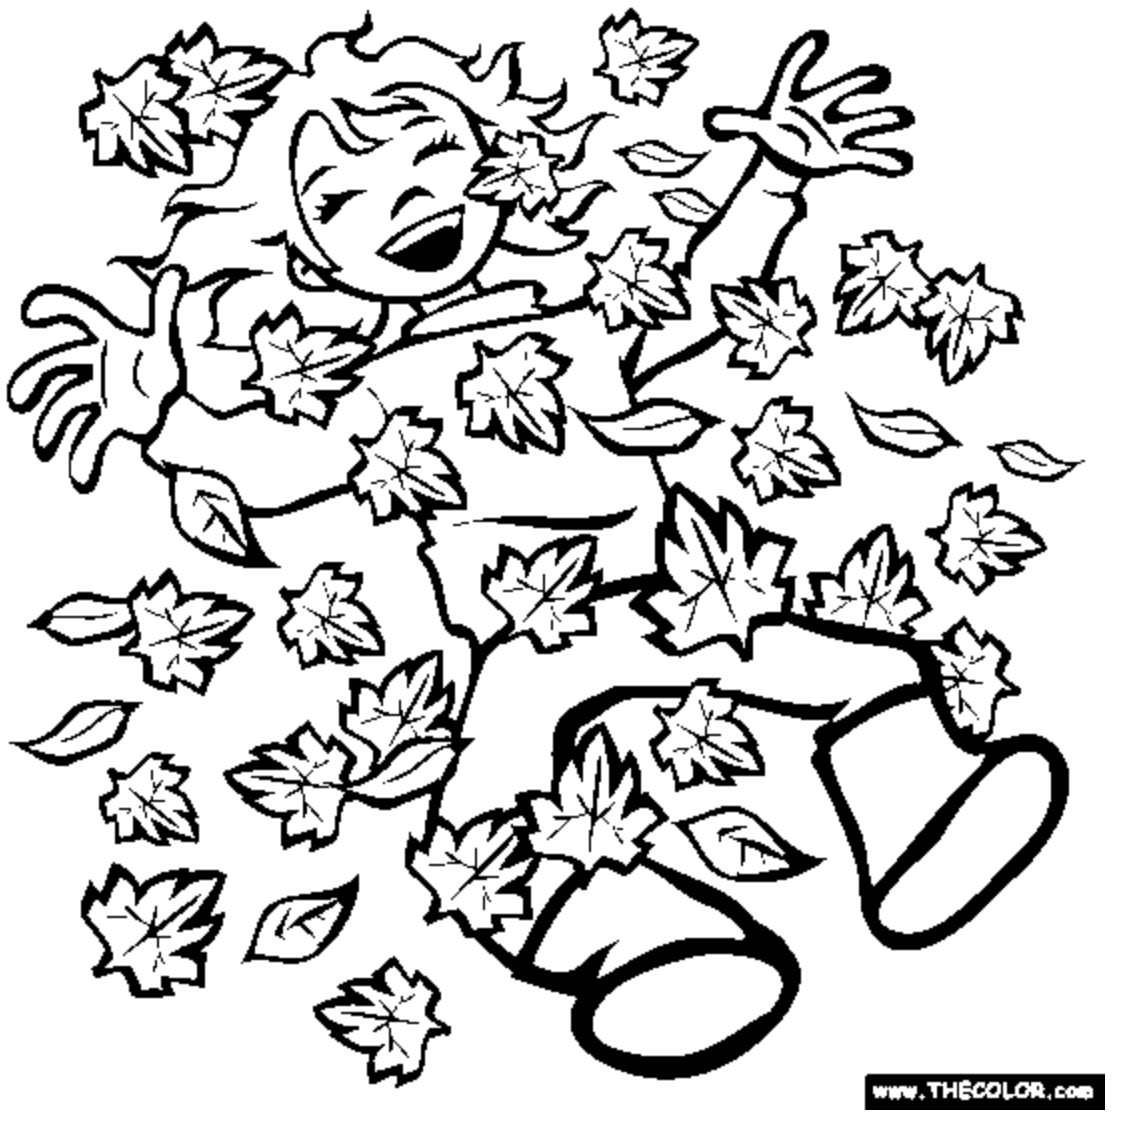 Coloring Pages Autumn Season Free Autumn And Fall Coloring Pages